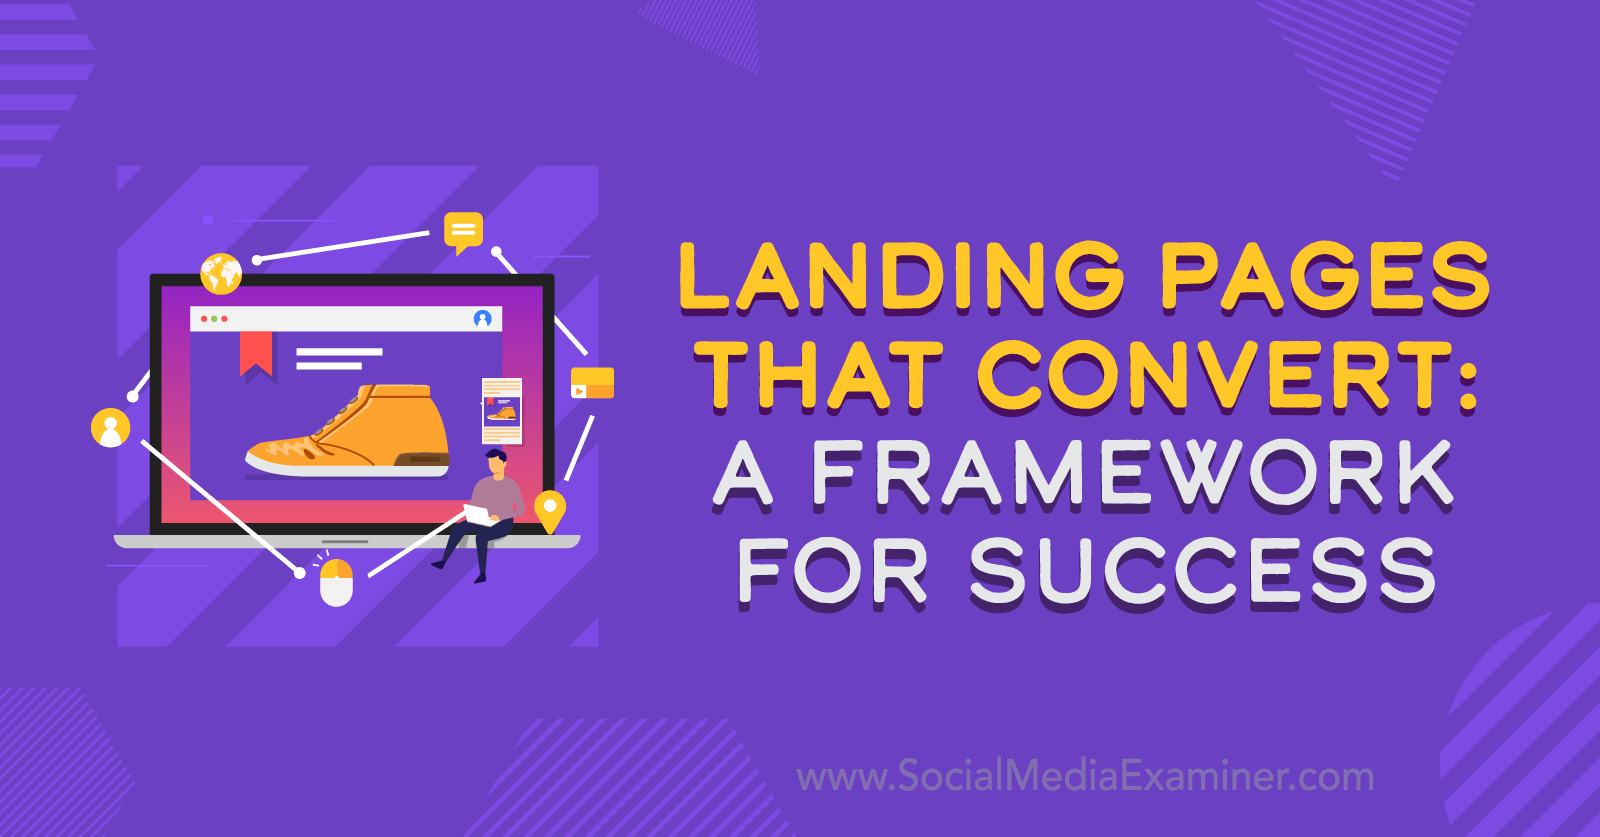 Landing Pages That Convert: A Framework for Success by Social Media Examiner